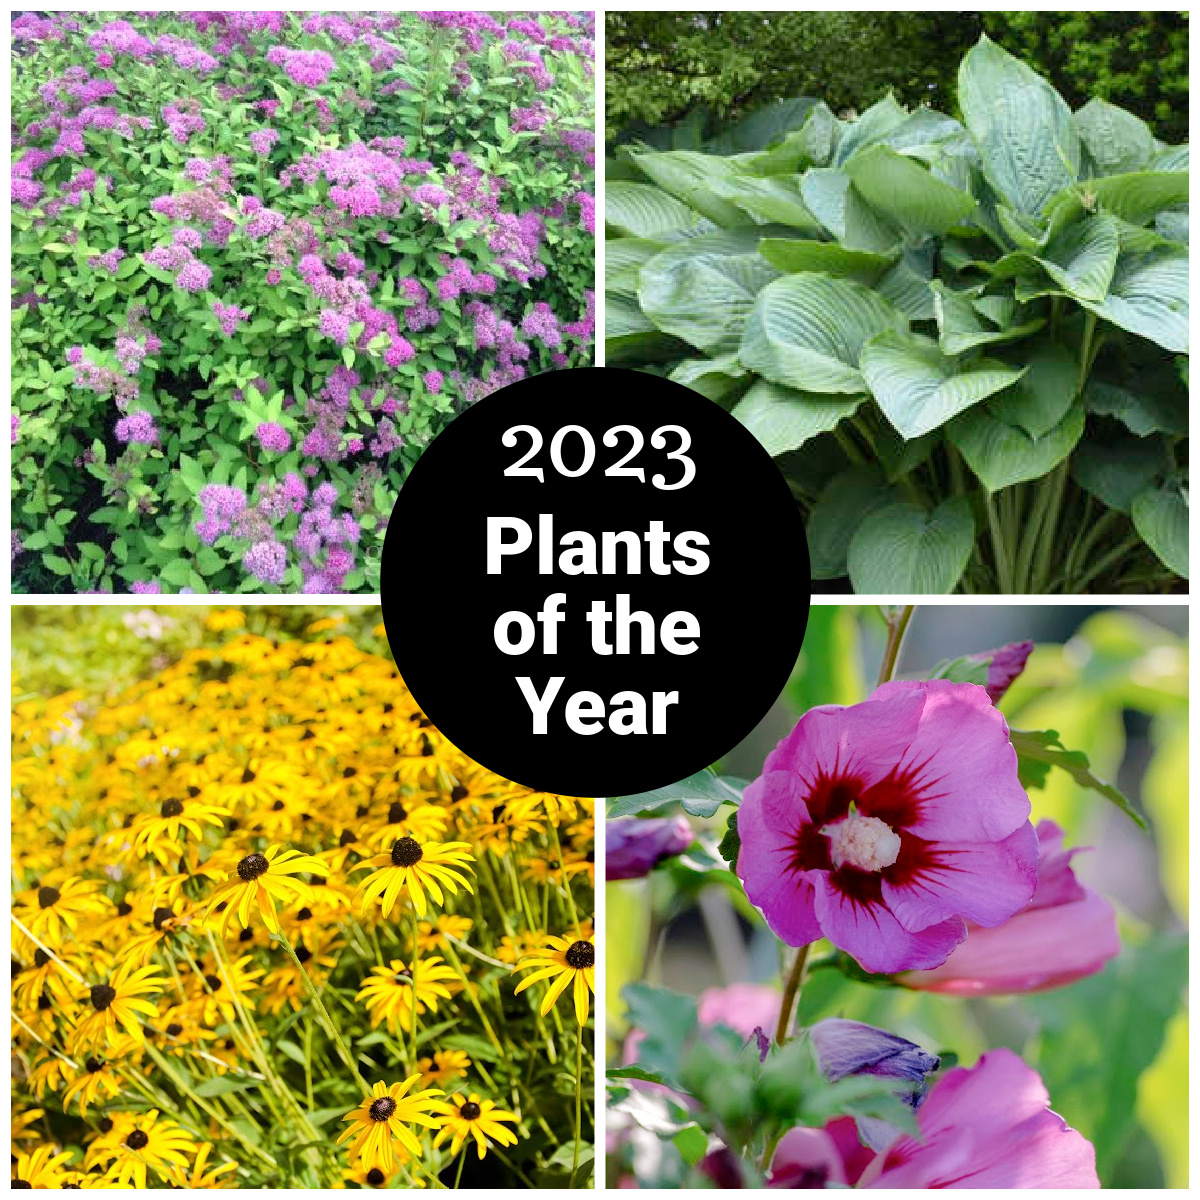 Collage of 2023 plants of the year including spirea, rudbeckia, hosta and rose of Sharon.